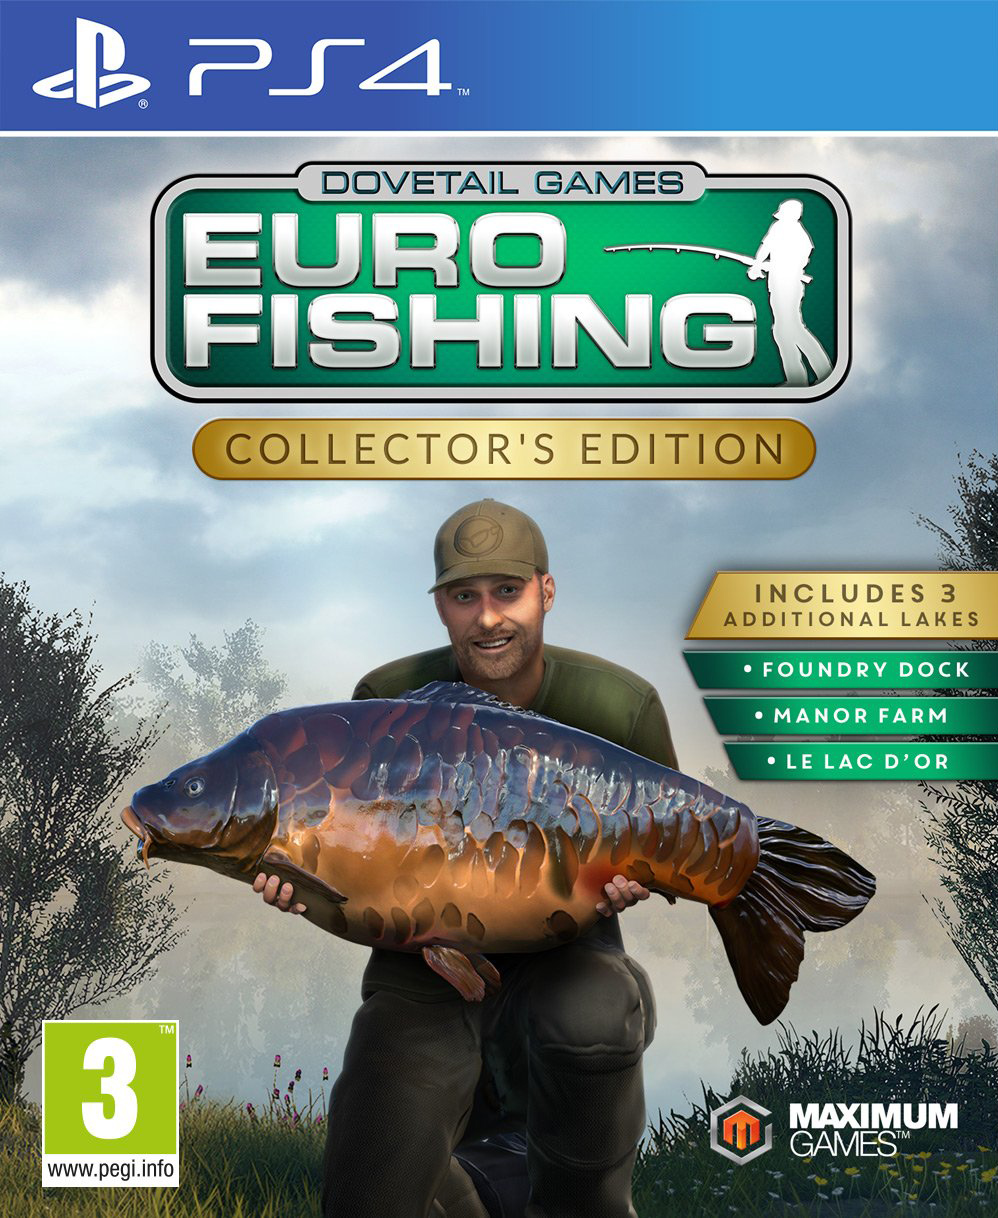 Euro Fishing - Collector's Edition [PS4] 5.05 / 6.72 / 7.02 [EUR] (2017) [Русский] (v1.06)